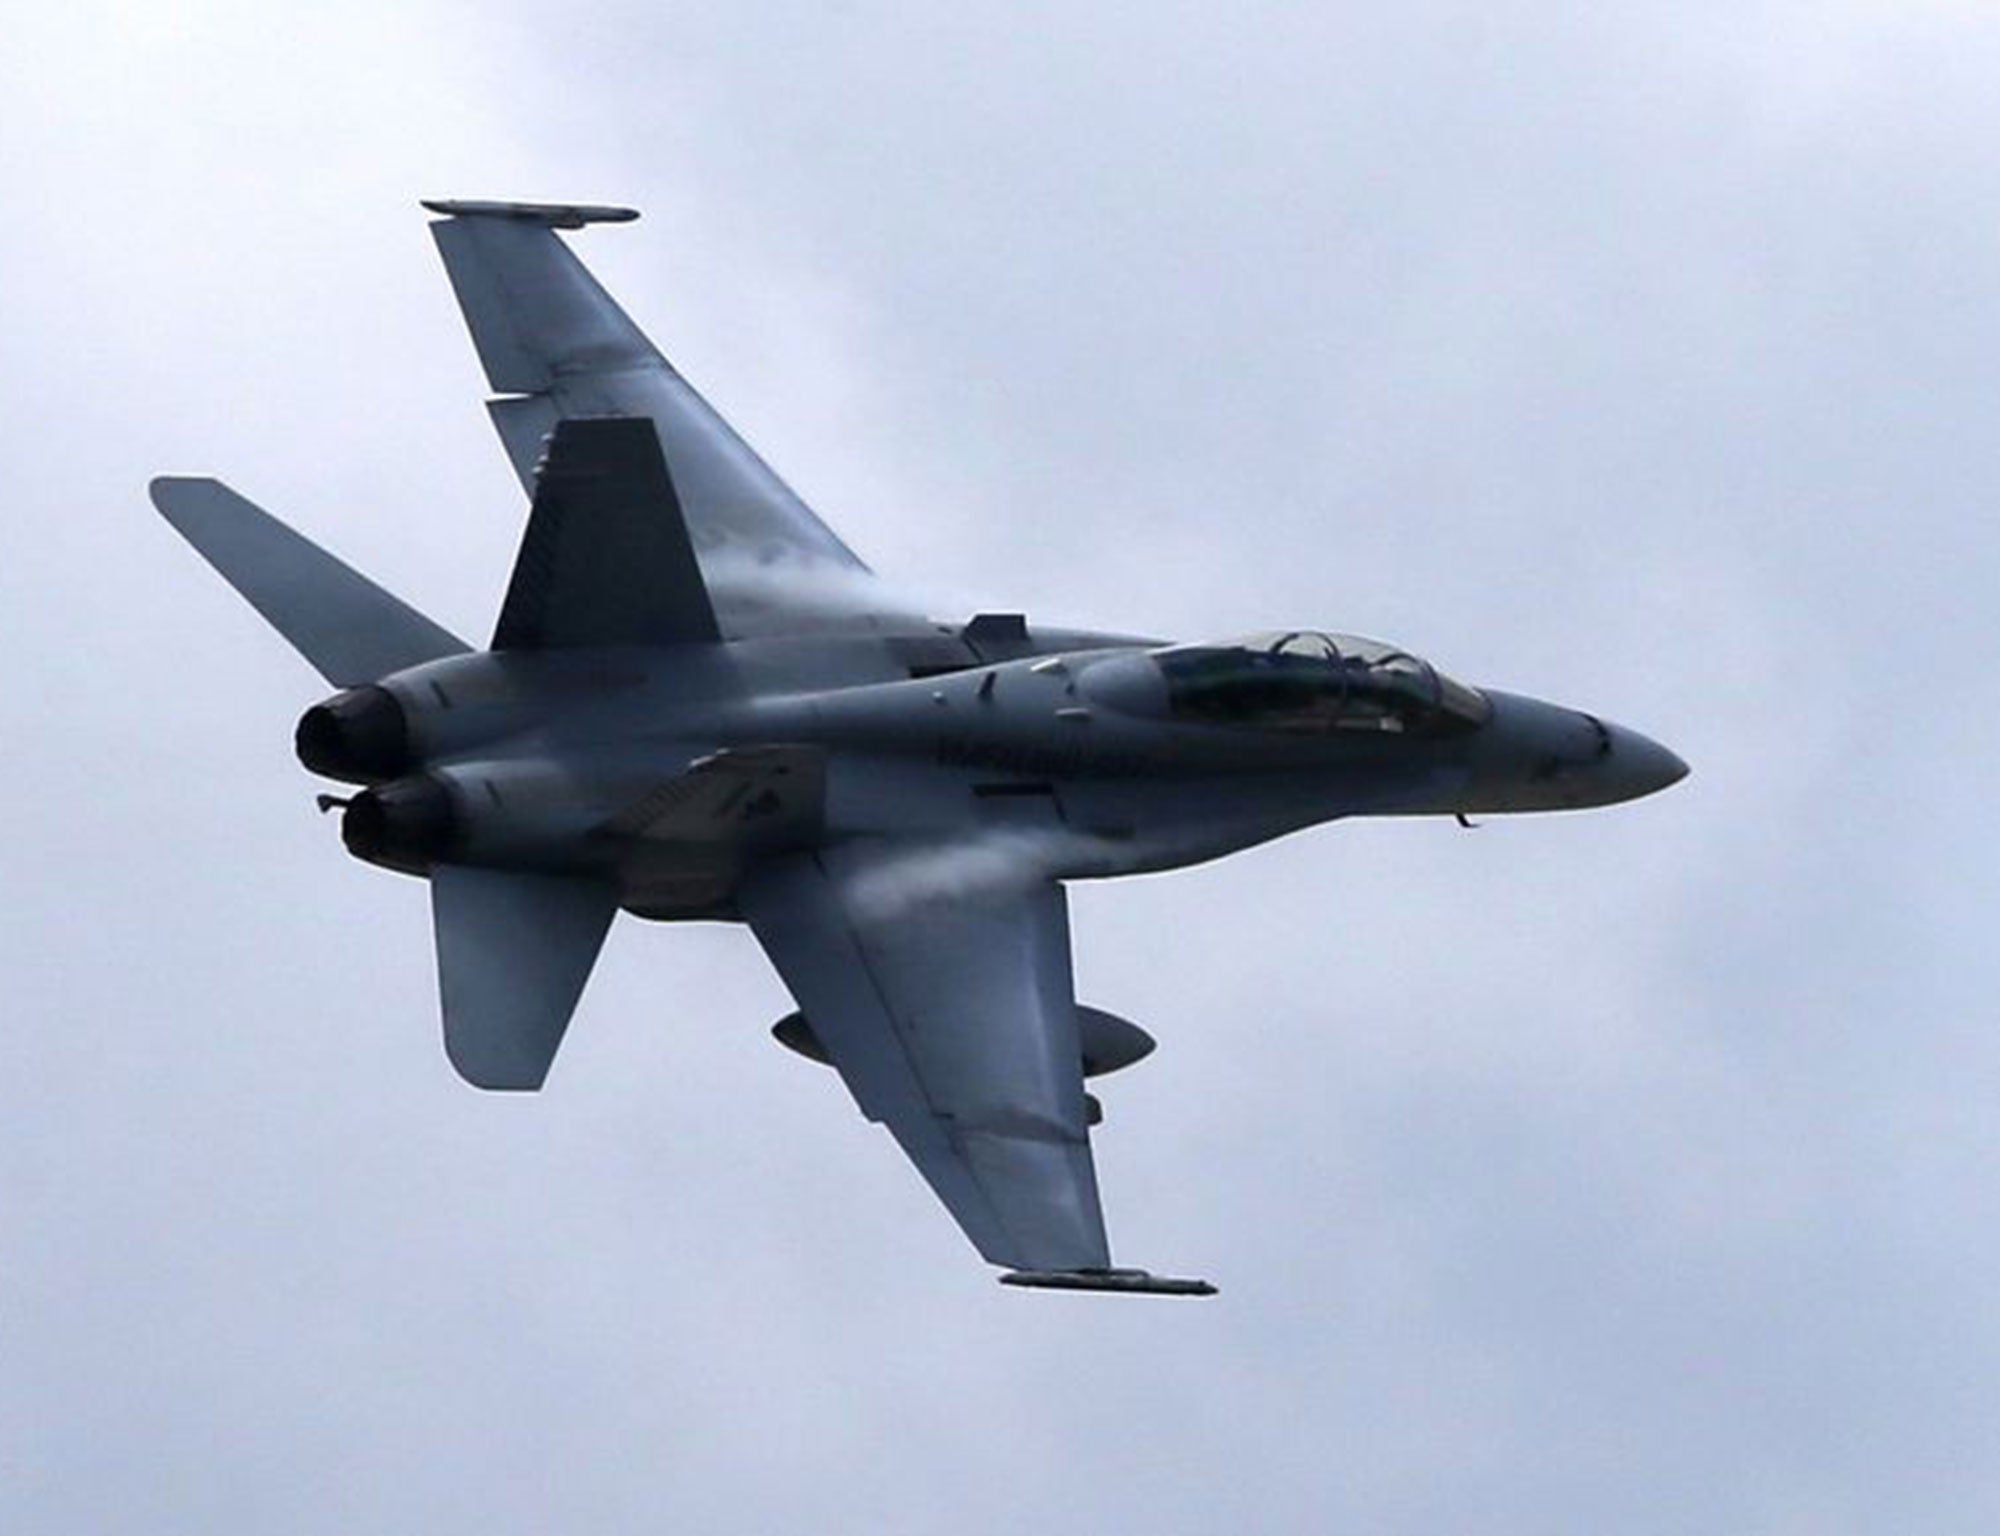 A US F/A-18 jet. Syrian Democratic forces provided ground surveillance ahead of the strike, ruling out civilian casualties